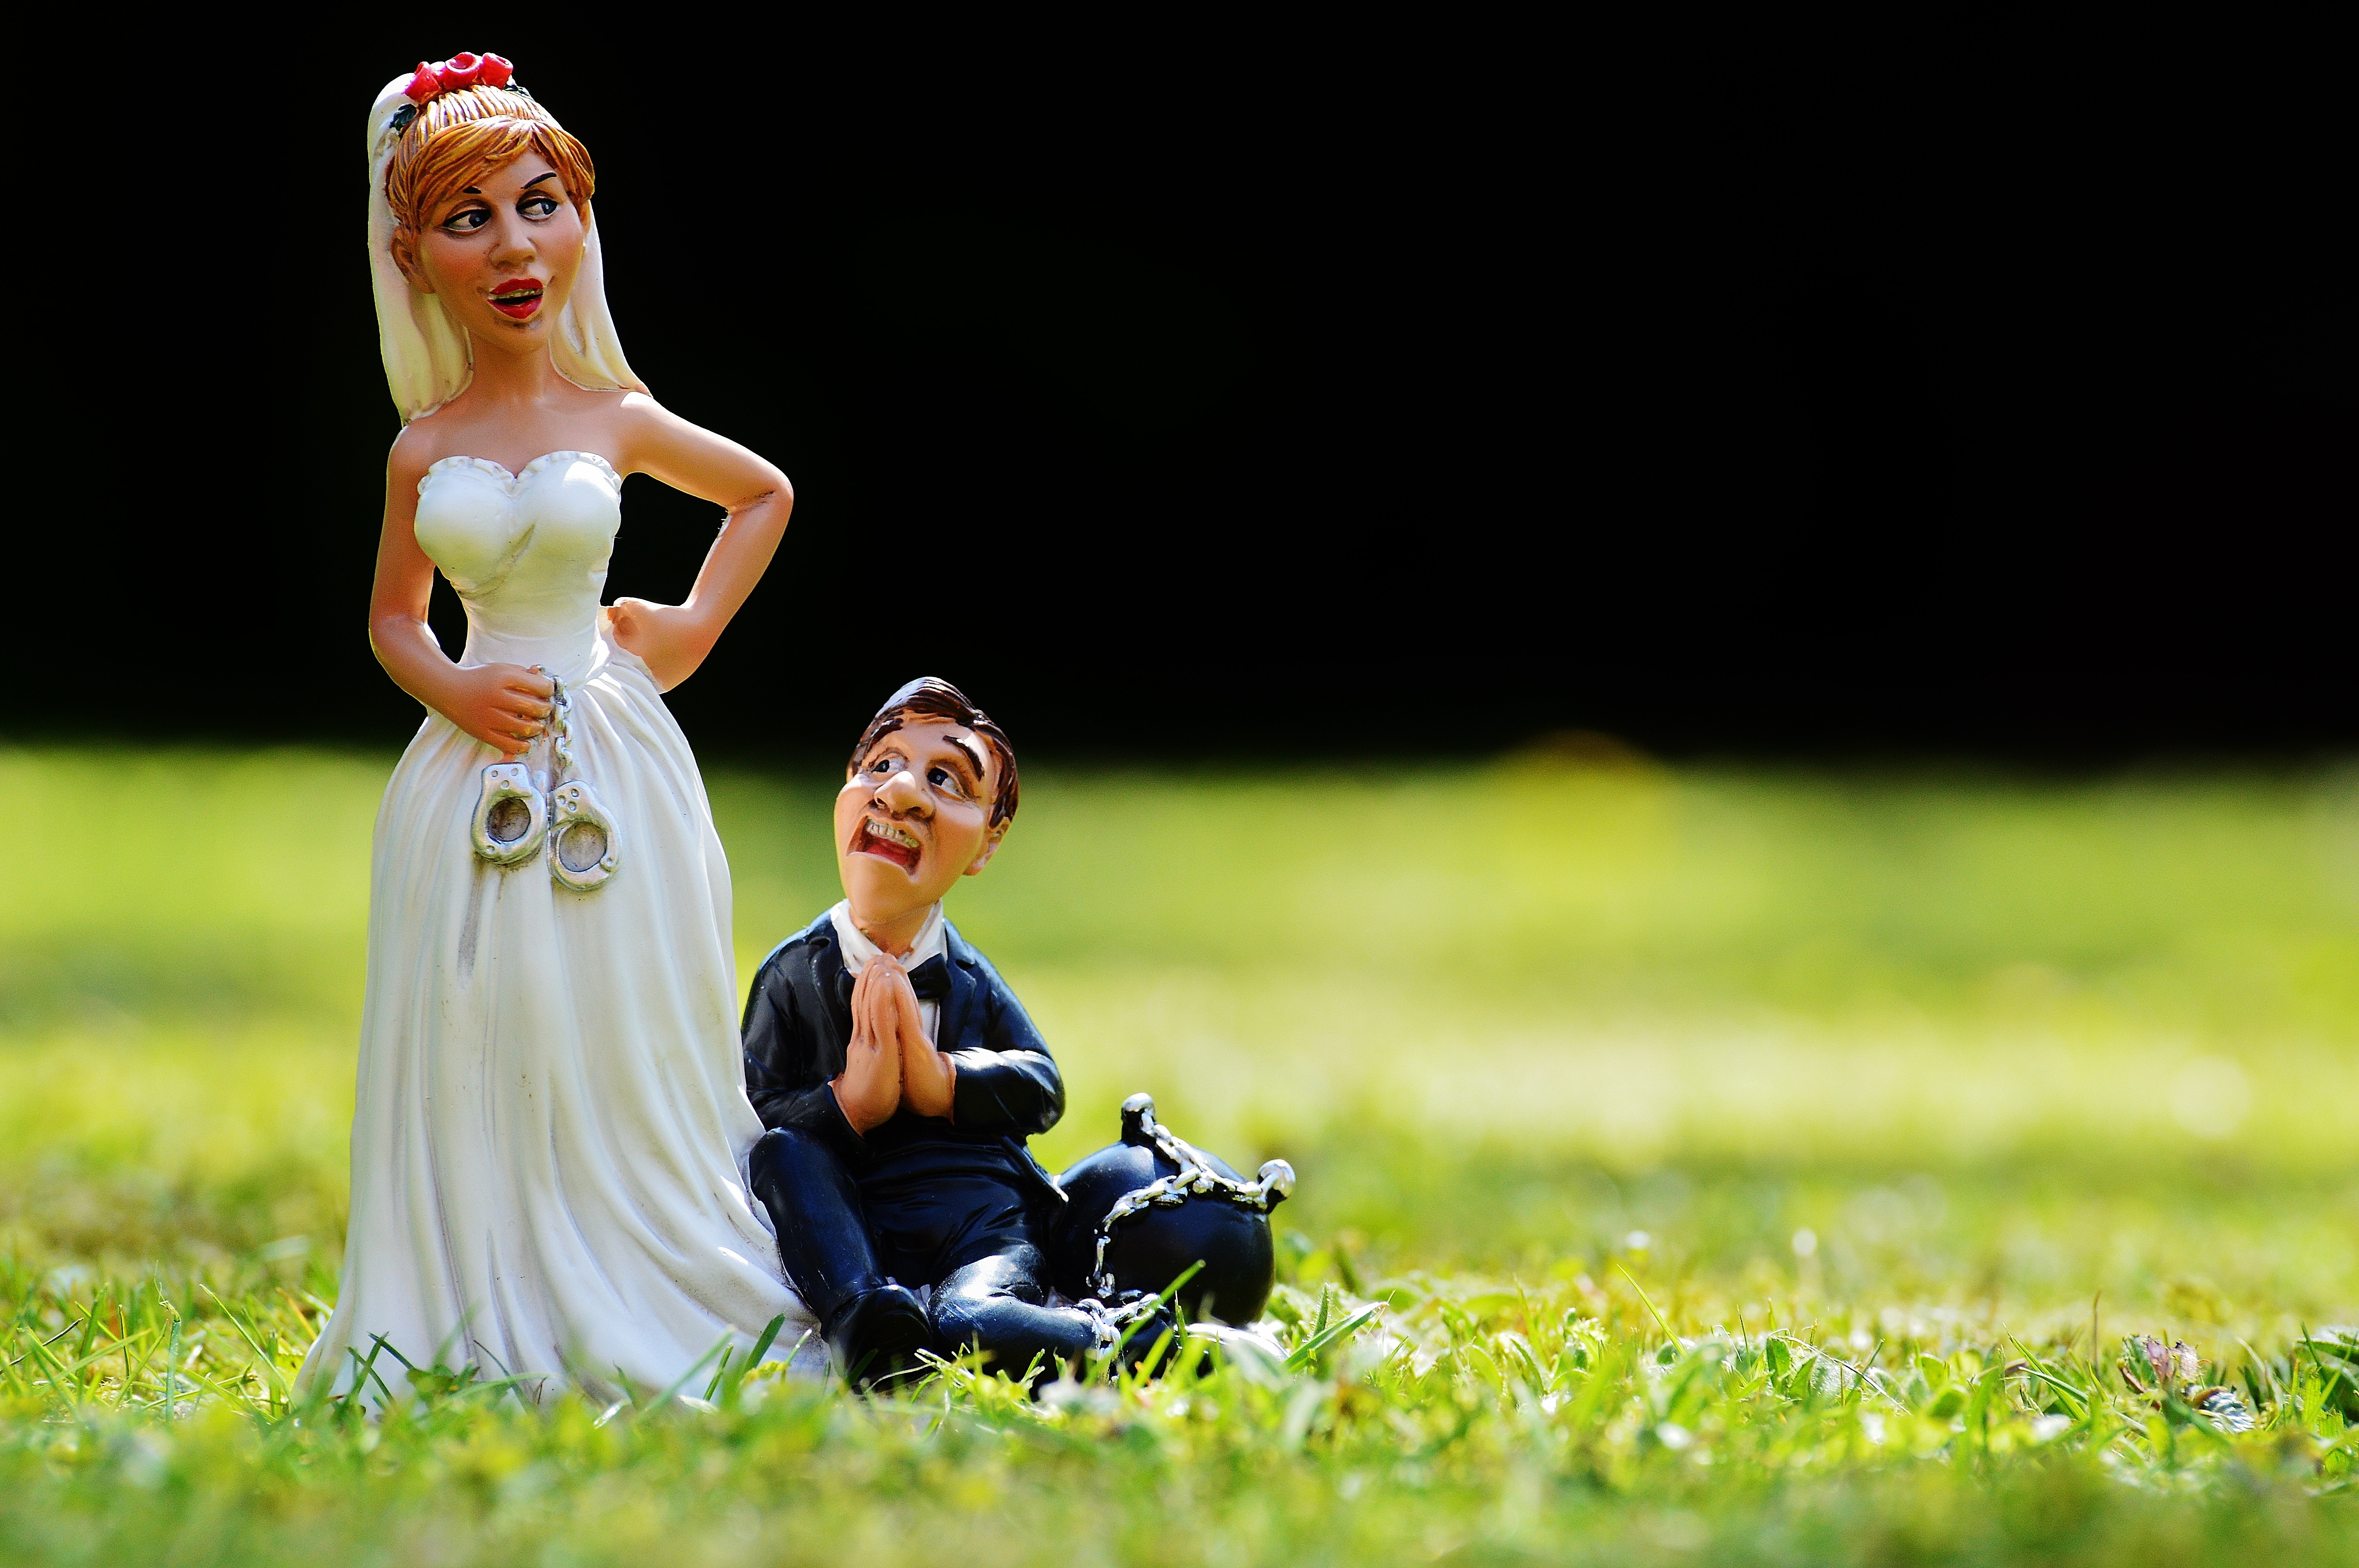 two bride and groom figure